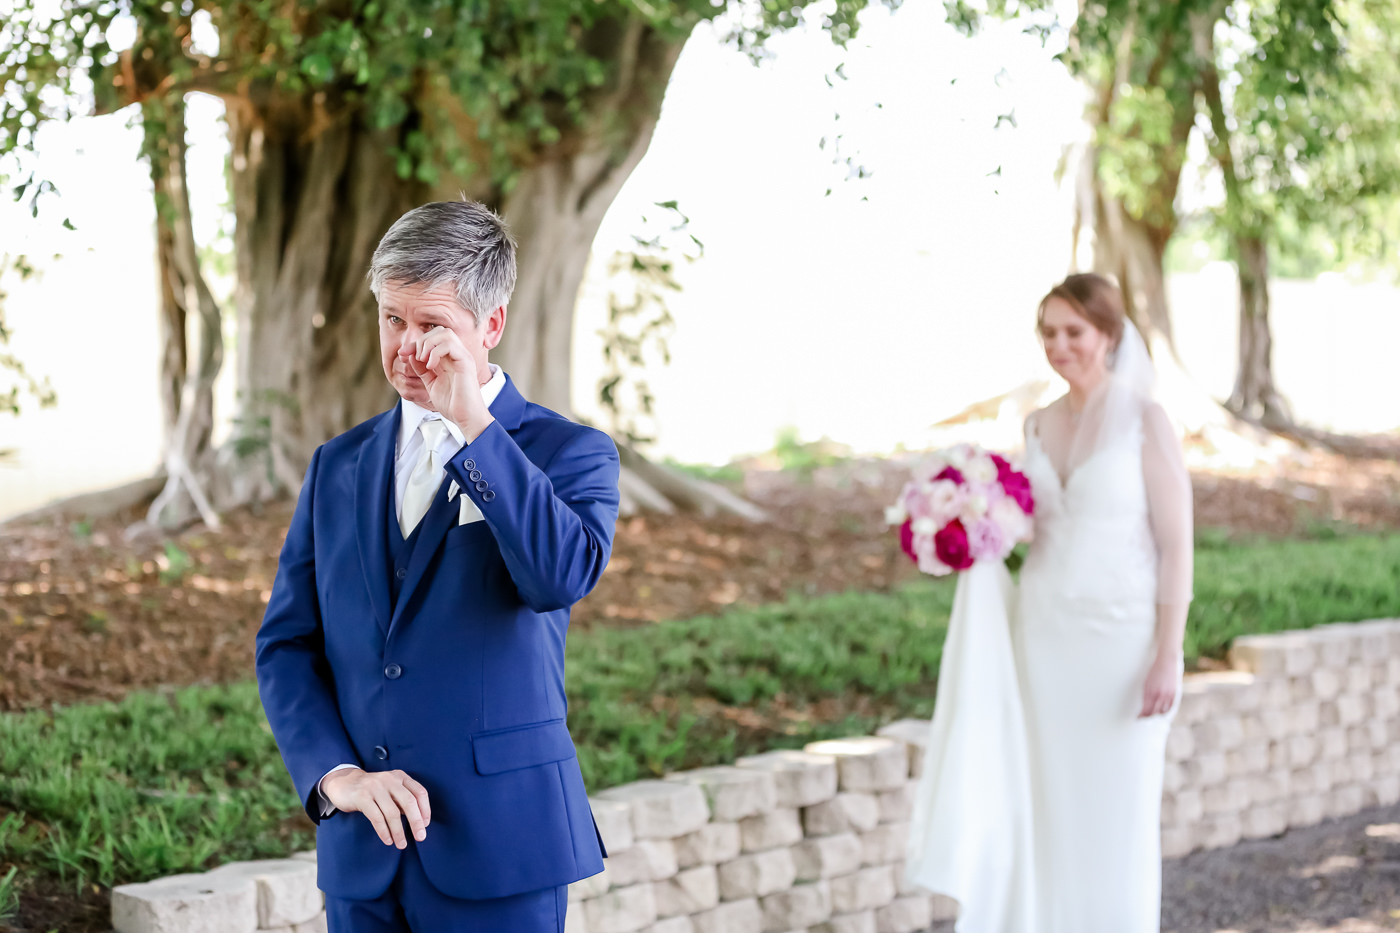 Emotional Groom During First Look Wedding Portrait in Blue Suit and White Tie | Tampa Bay Wedding Photographer Lifelong Photography Studios